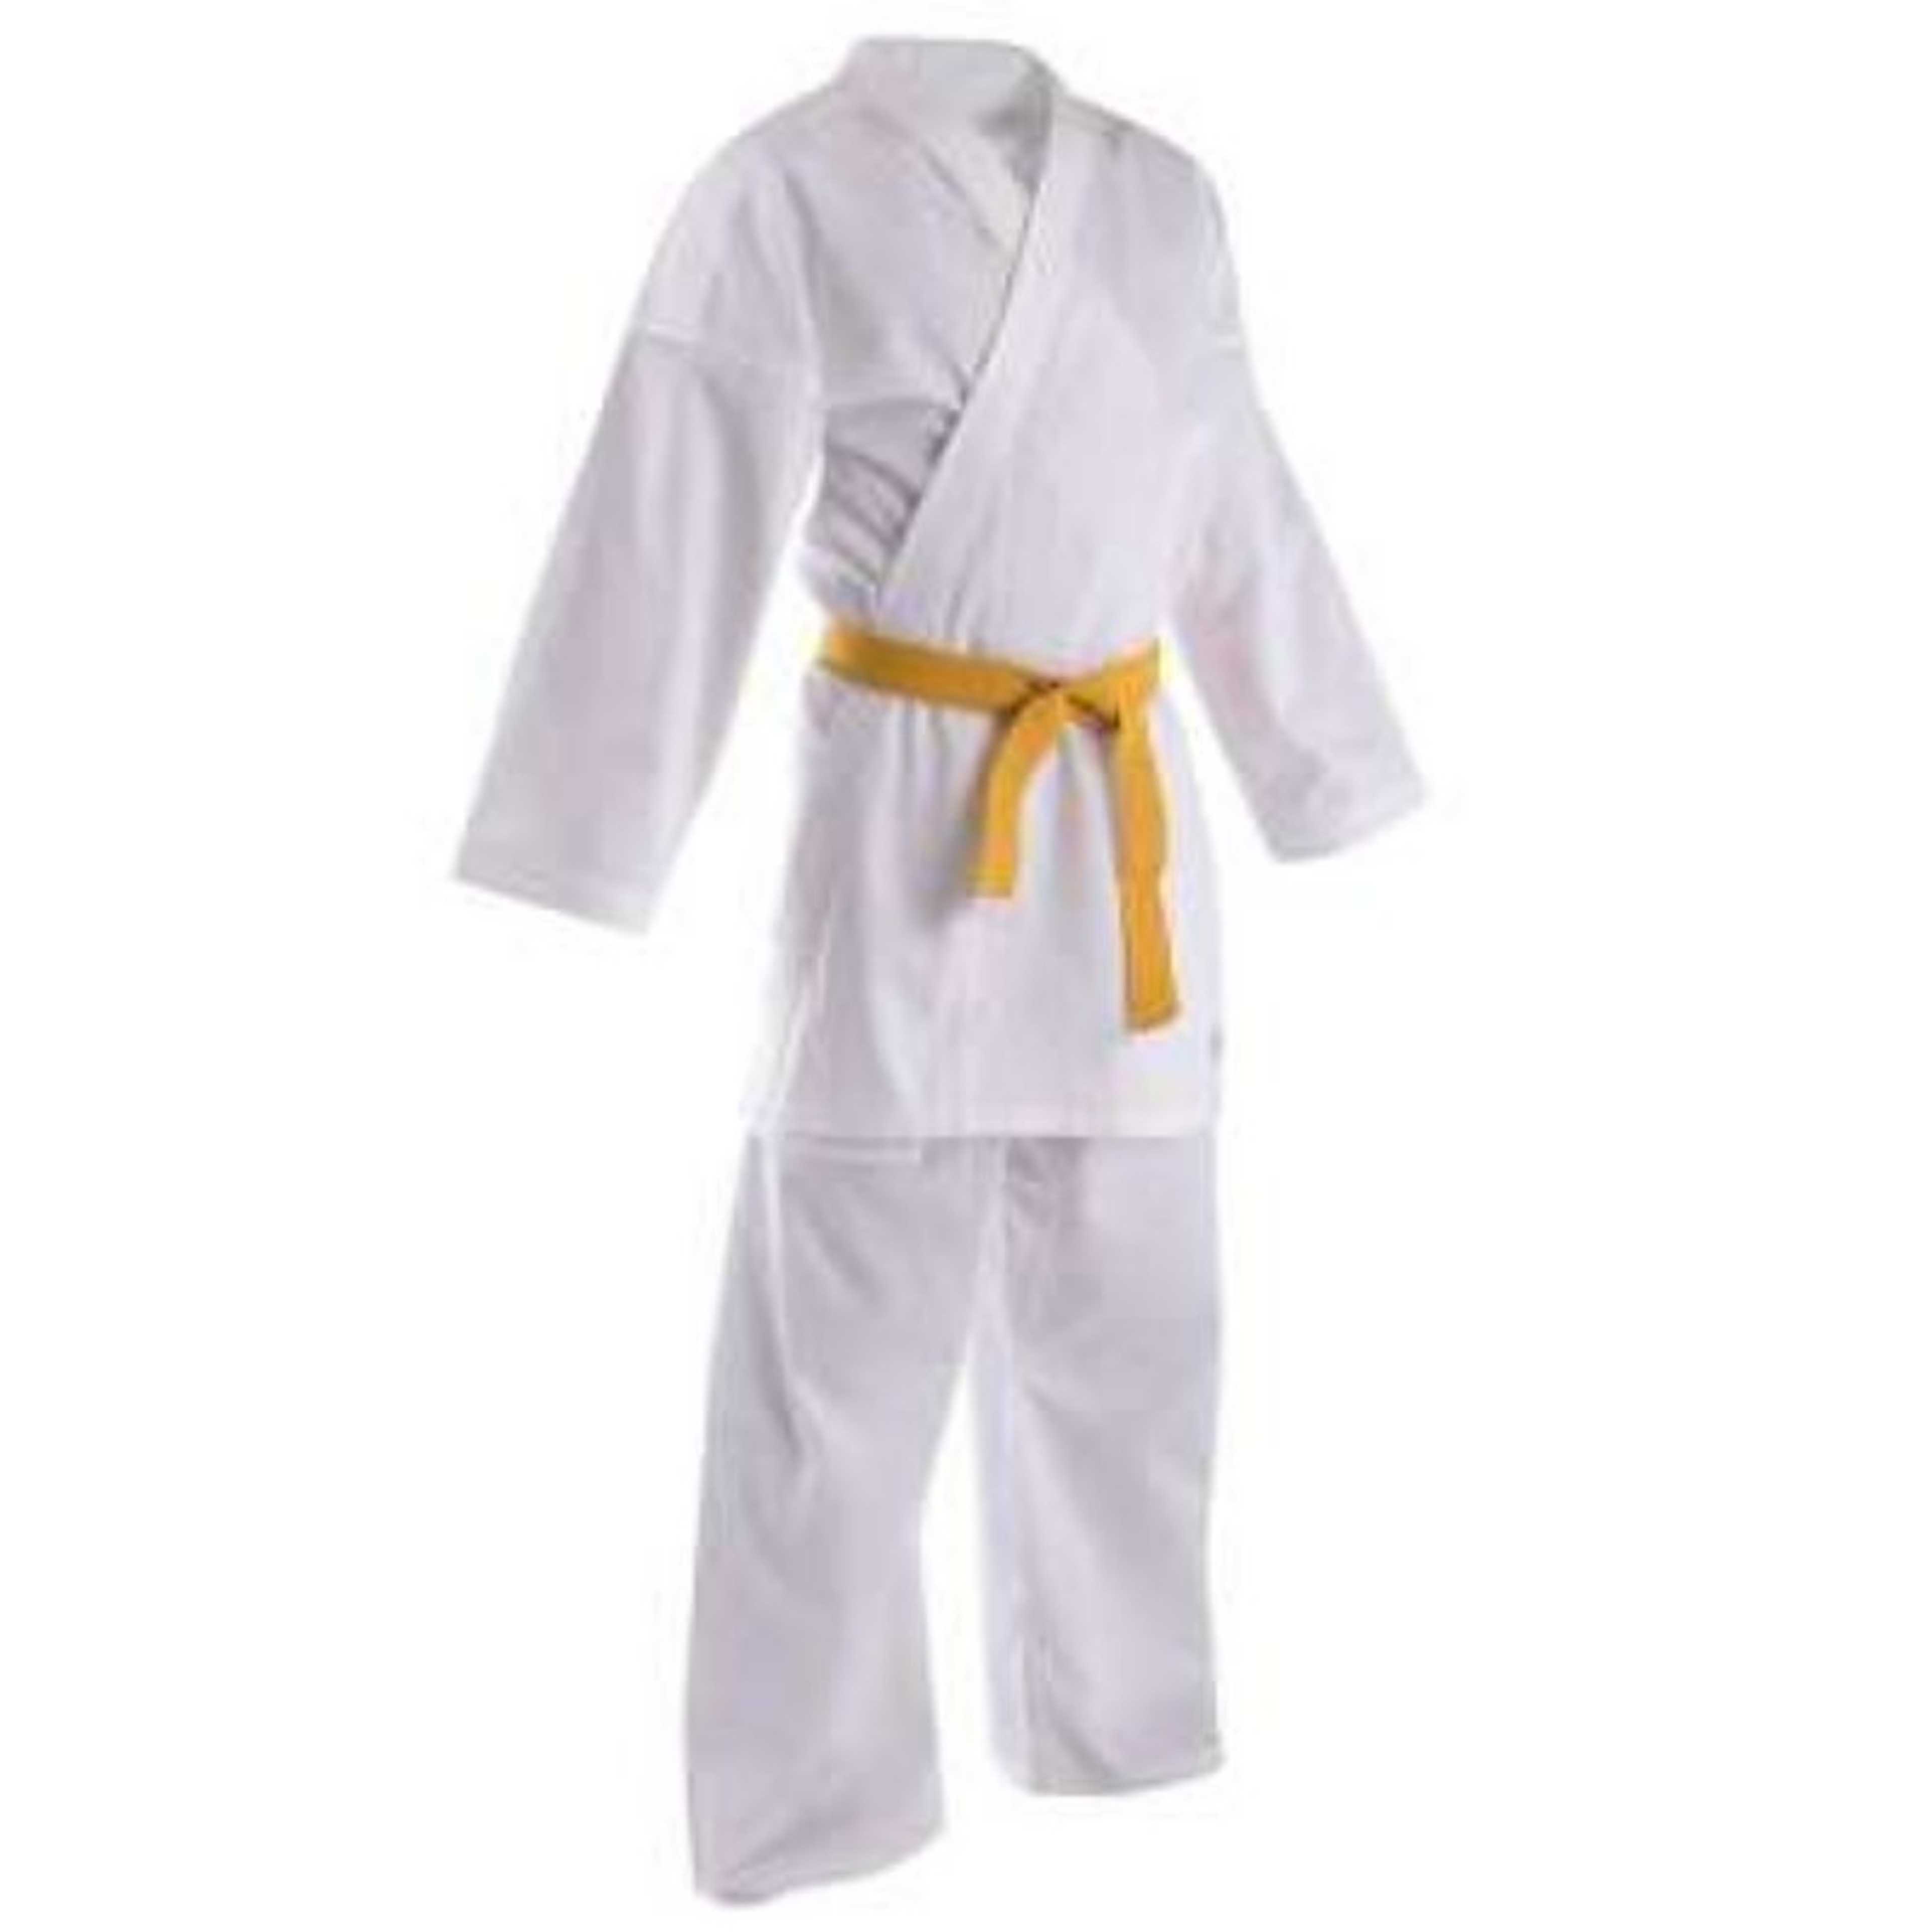 Export Quality Karate Dress Kit No 2 with Yellow Belt